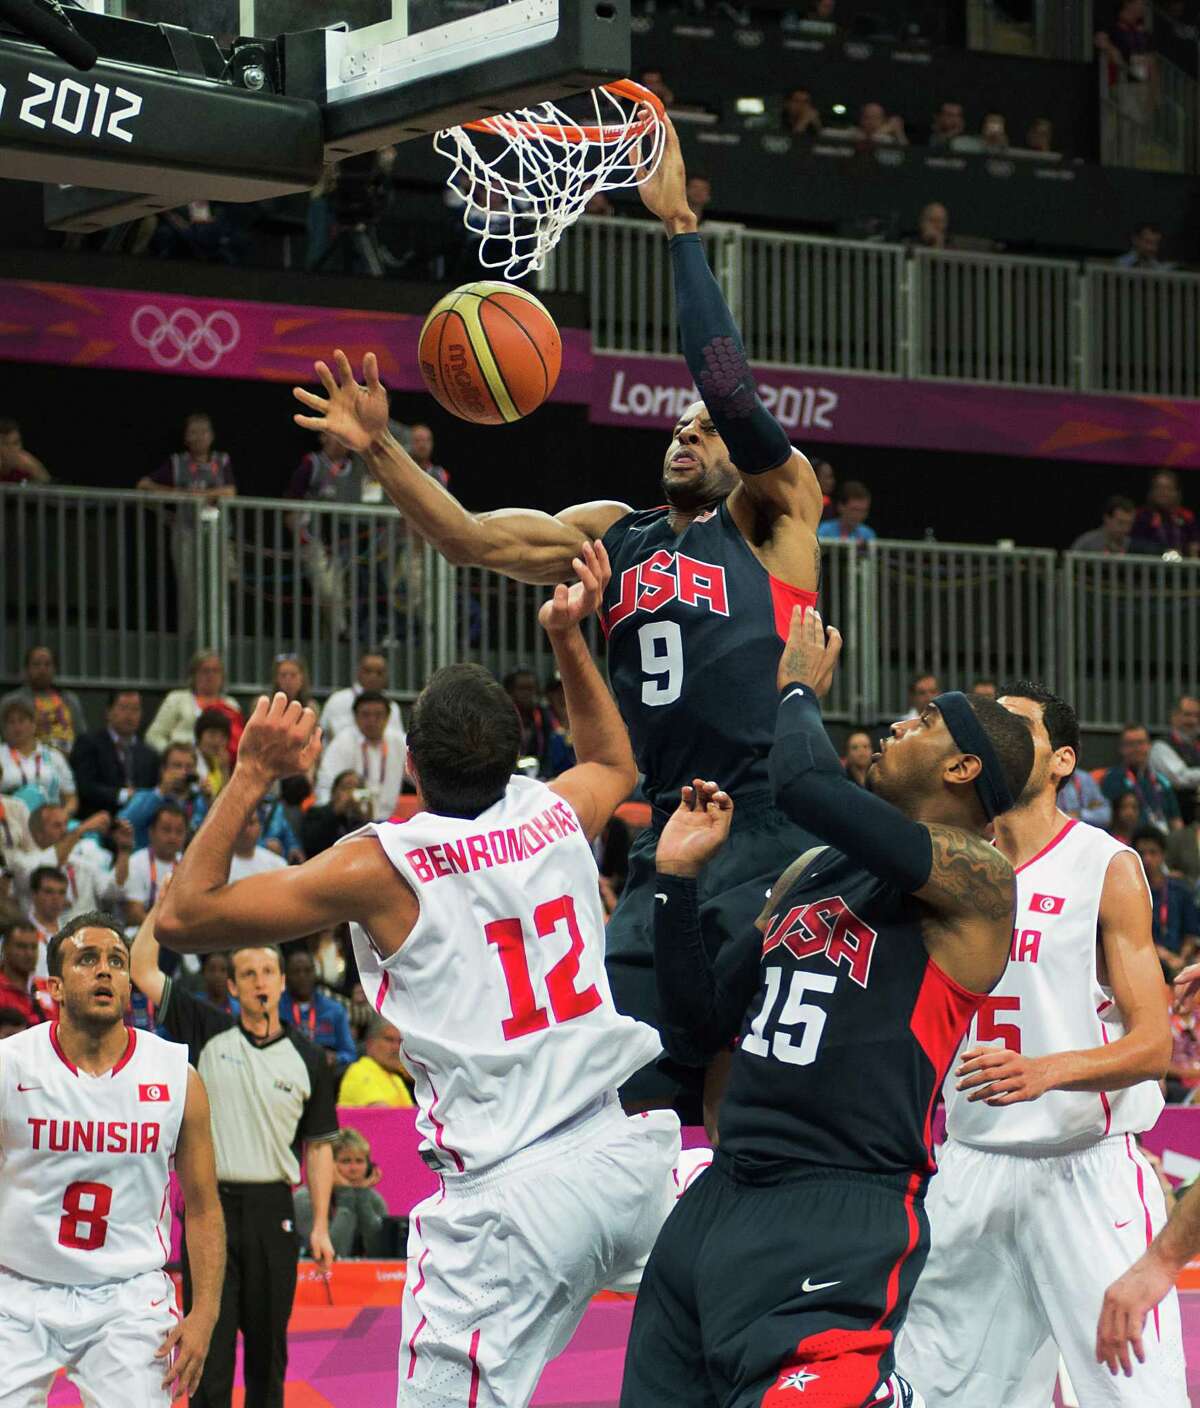 USA's Andre Iguodala dunks the ball over Tunisia's Makram Ben Romdhane during a men's preliminary round basketball game at the 2012 London Olympics on Tuesday, July 31, 2012.